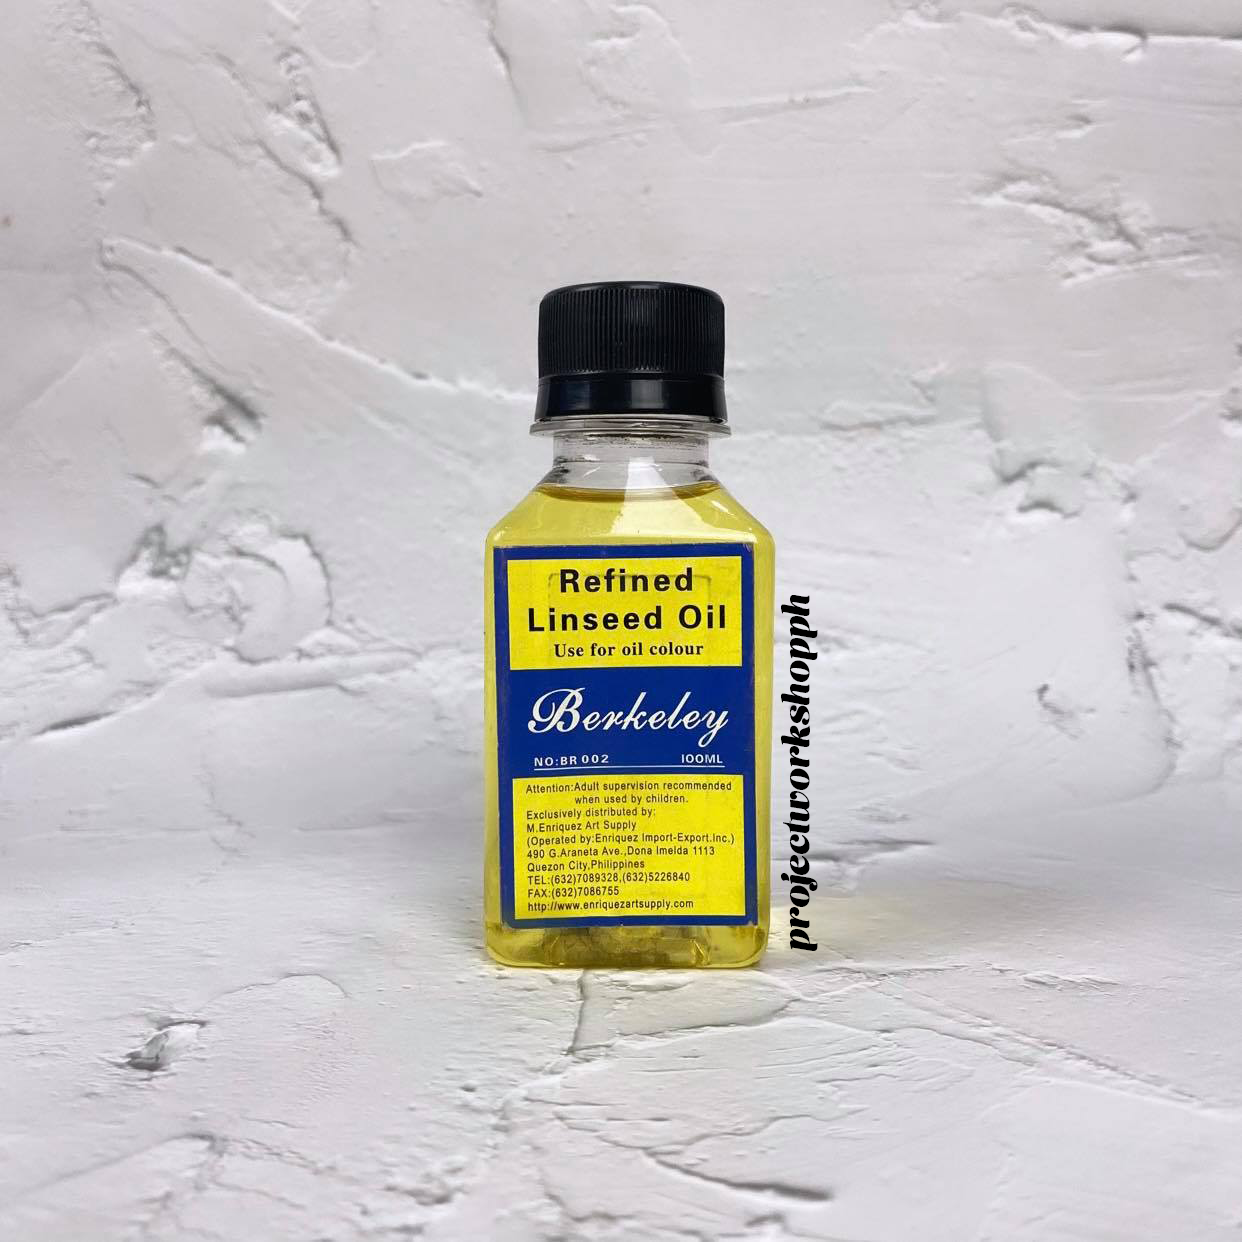 Berkeley Linseed Oil 100ml - The Oil Paint Store